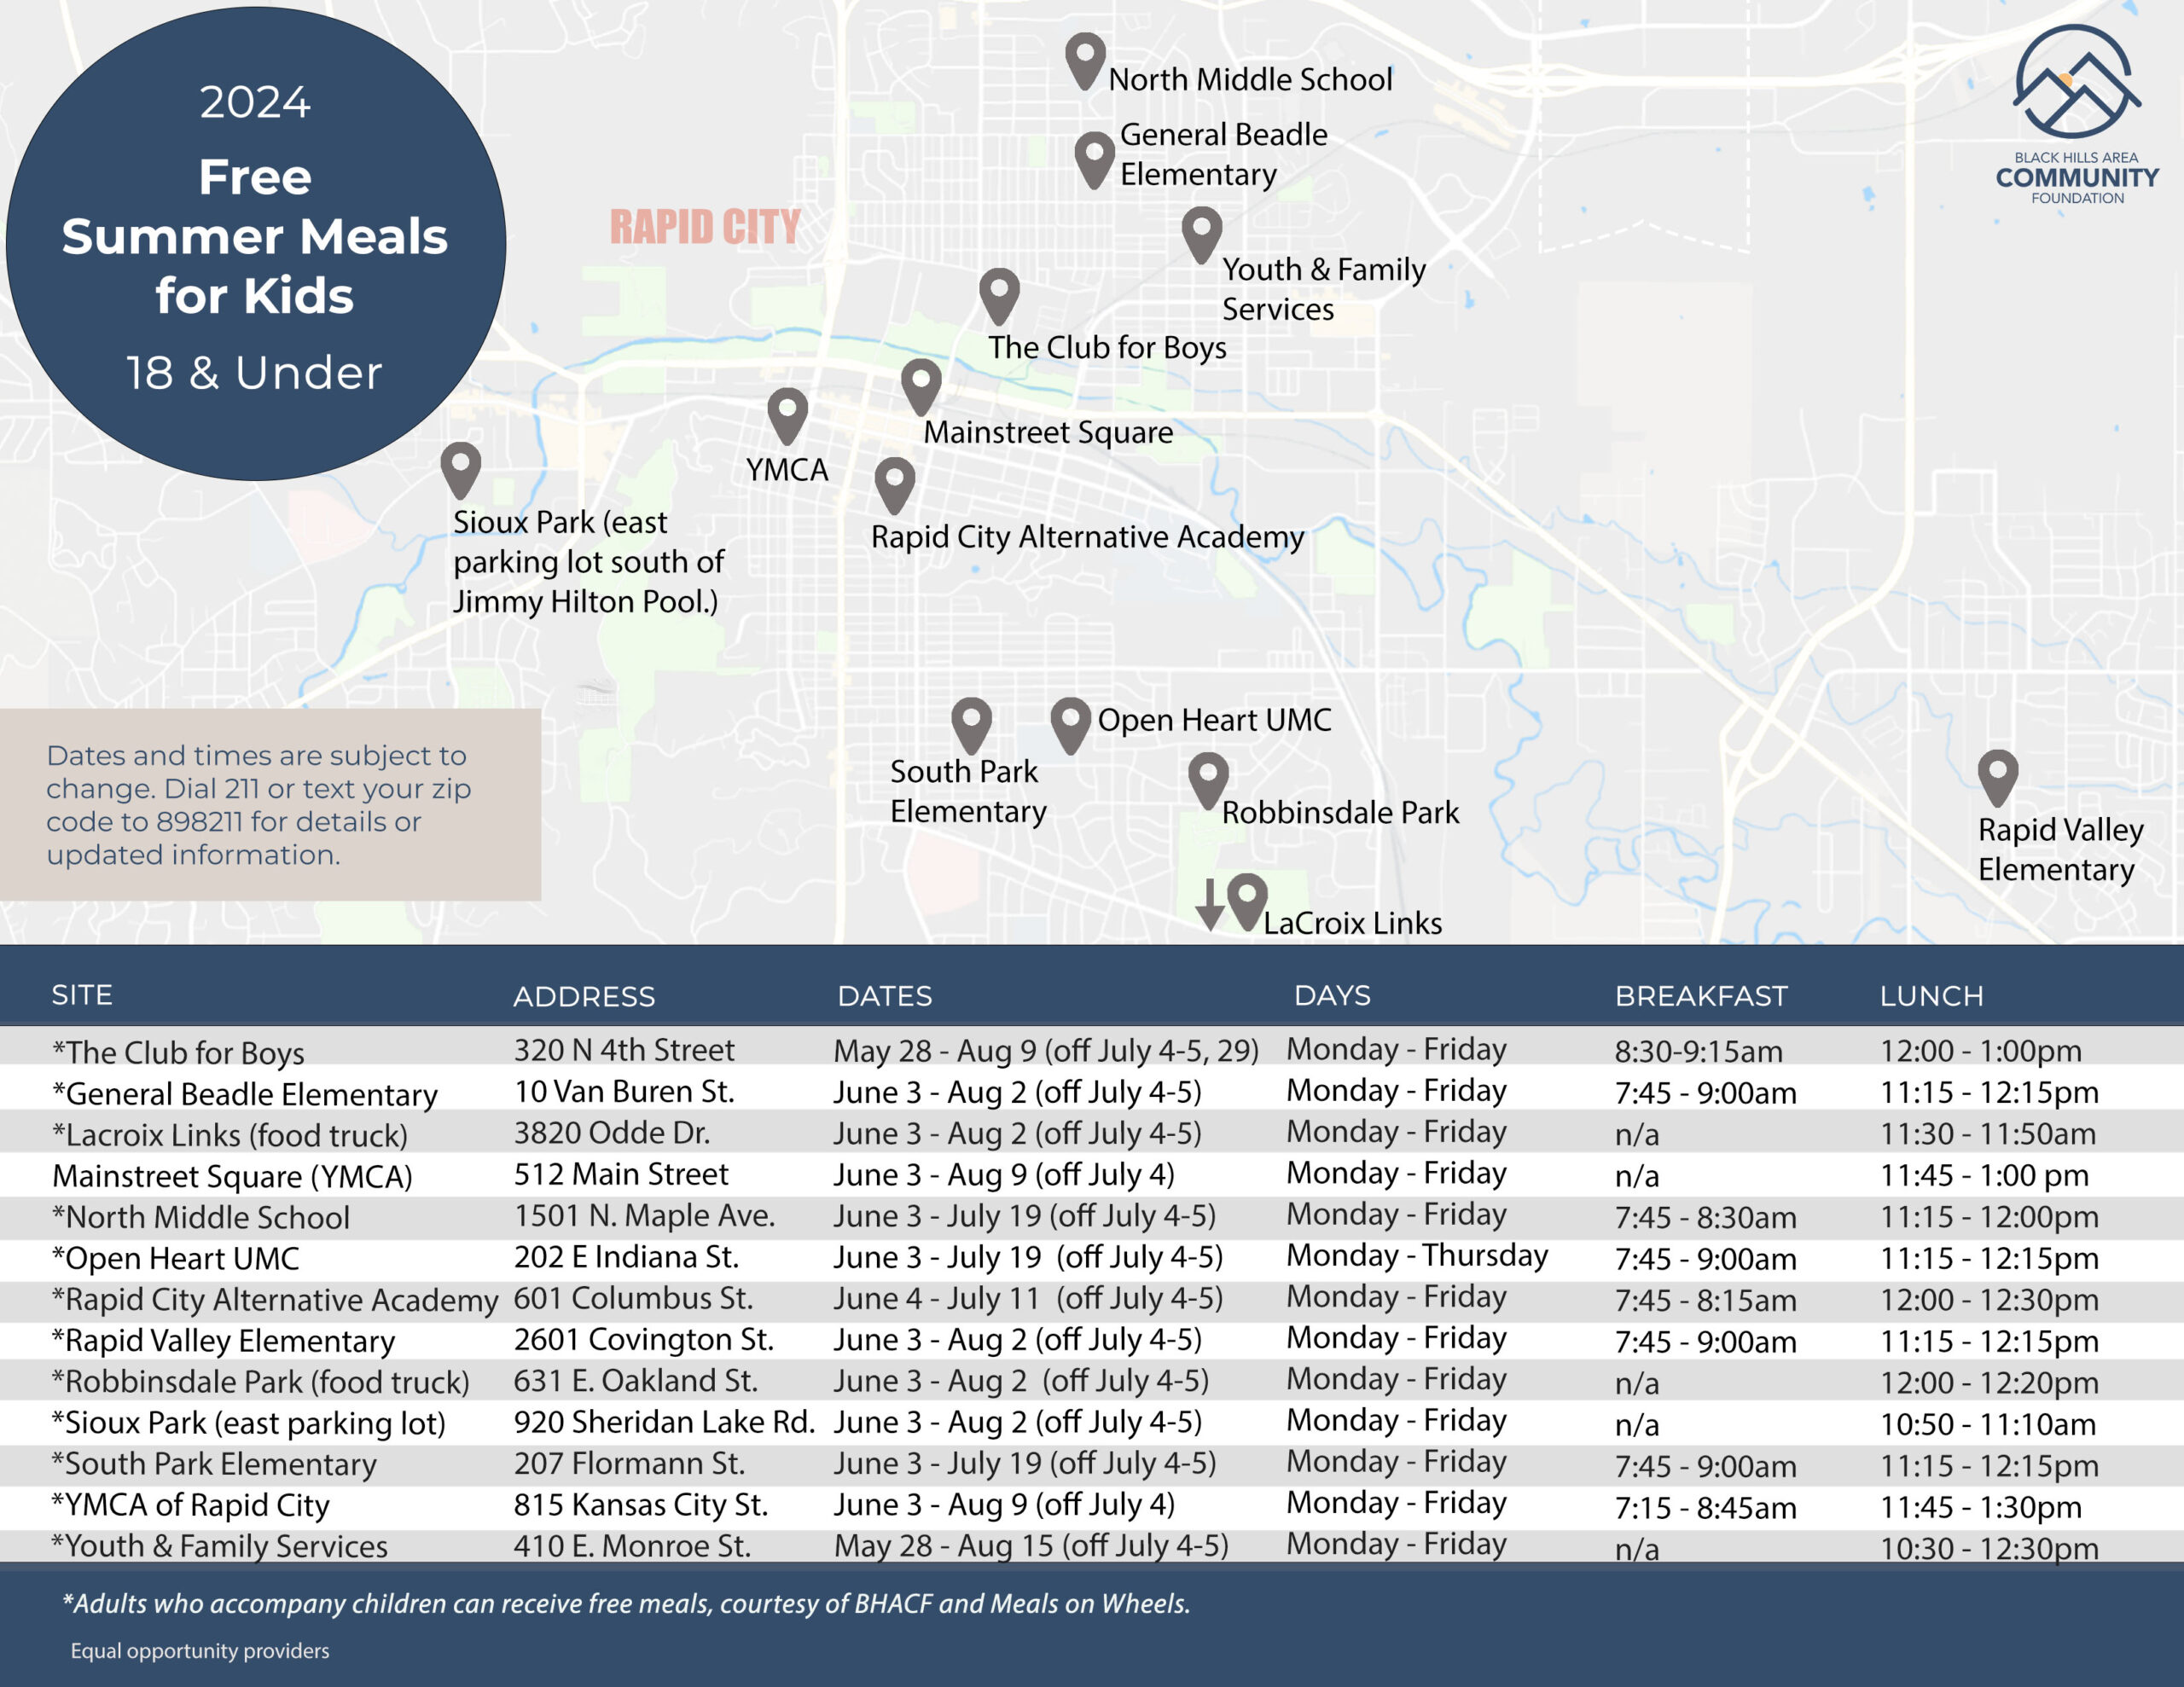 A list displays dates, times, and locations where children and their guardians can receive a free meal in Rapid City during the summer of 2024. Call 211 for the most updated information.